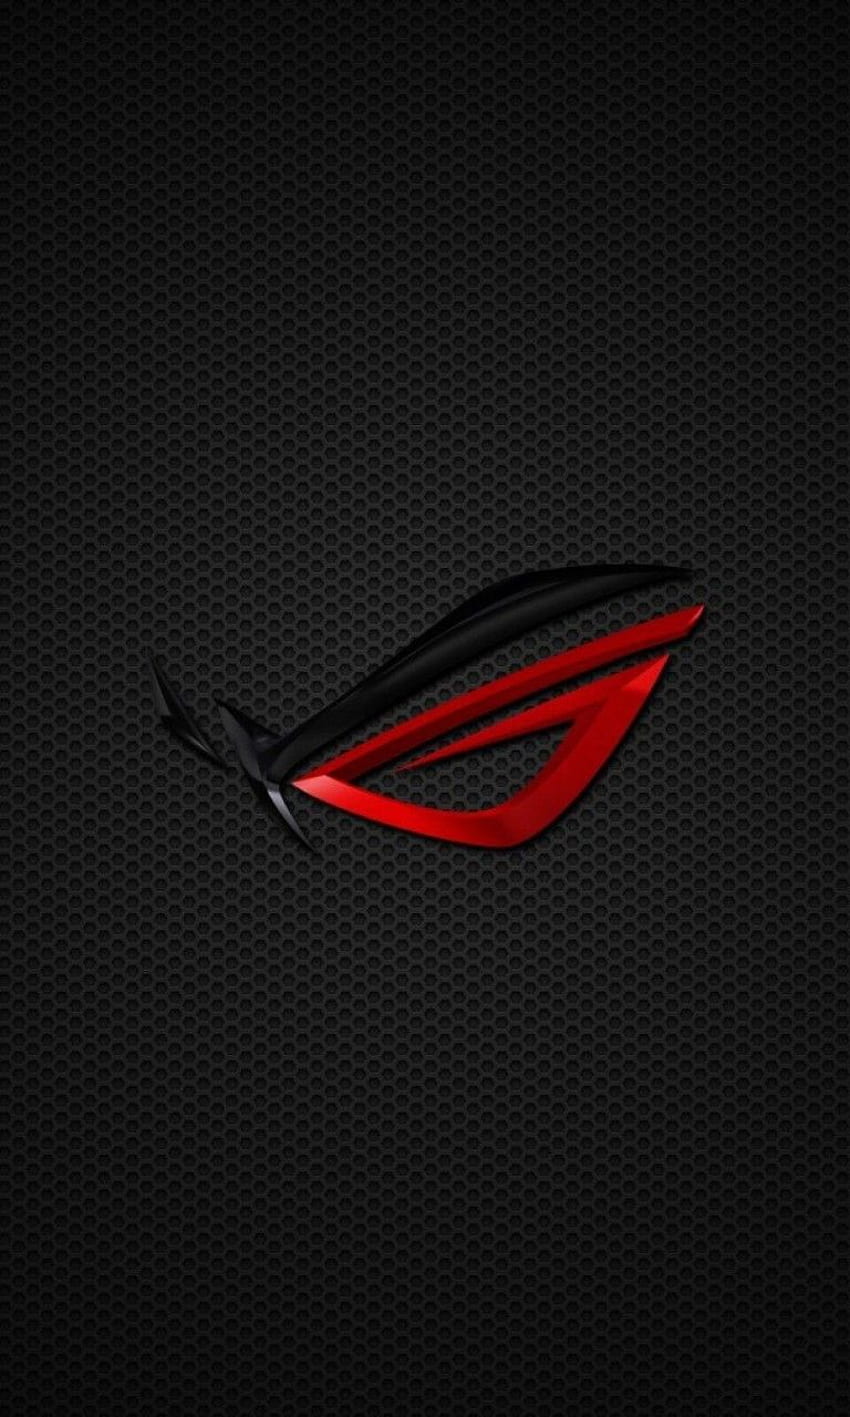 Best Article About Gaming Blog's: Rog Gaming For Mobile, HP Gaming HD phone wallpaper